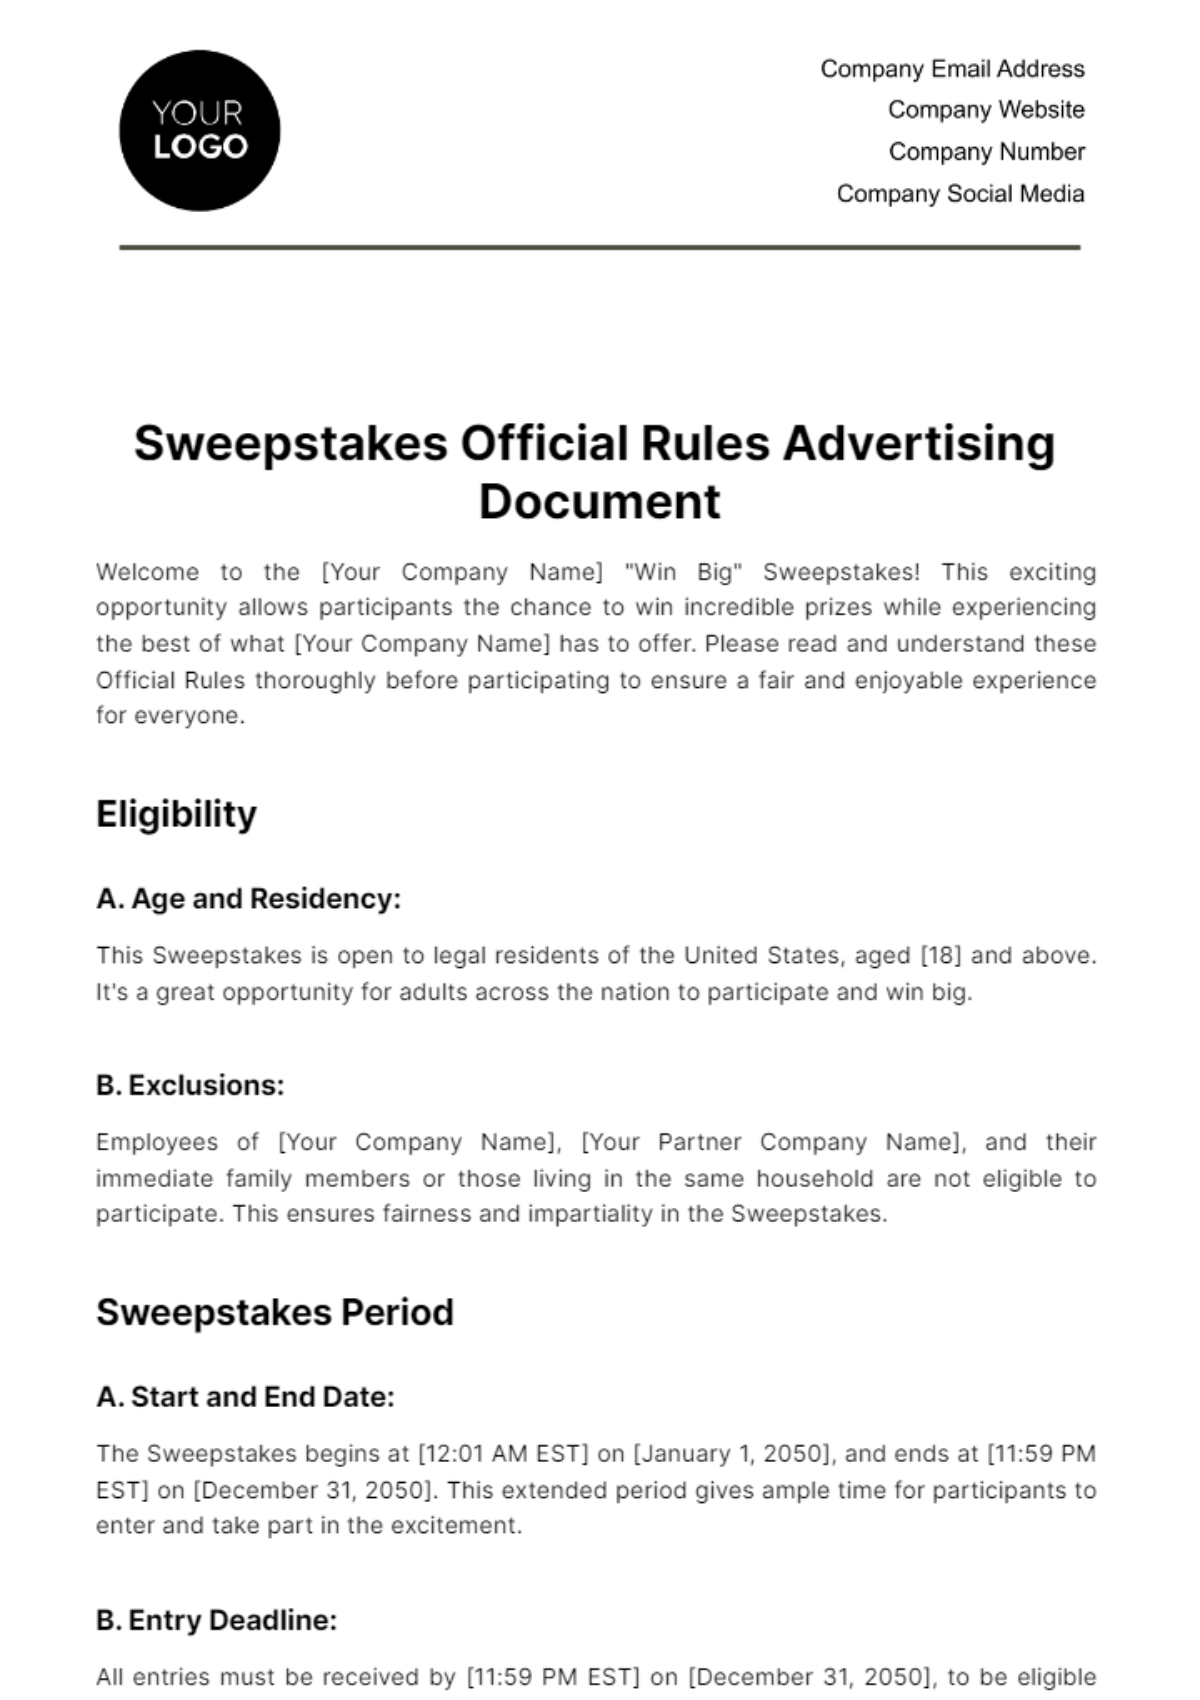 Free Sweepstakes Official Rules Advertising Document Template